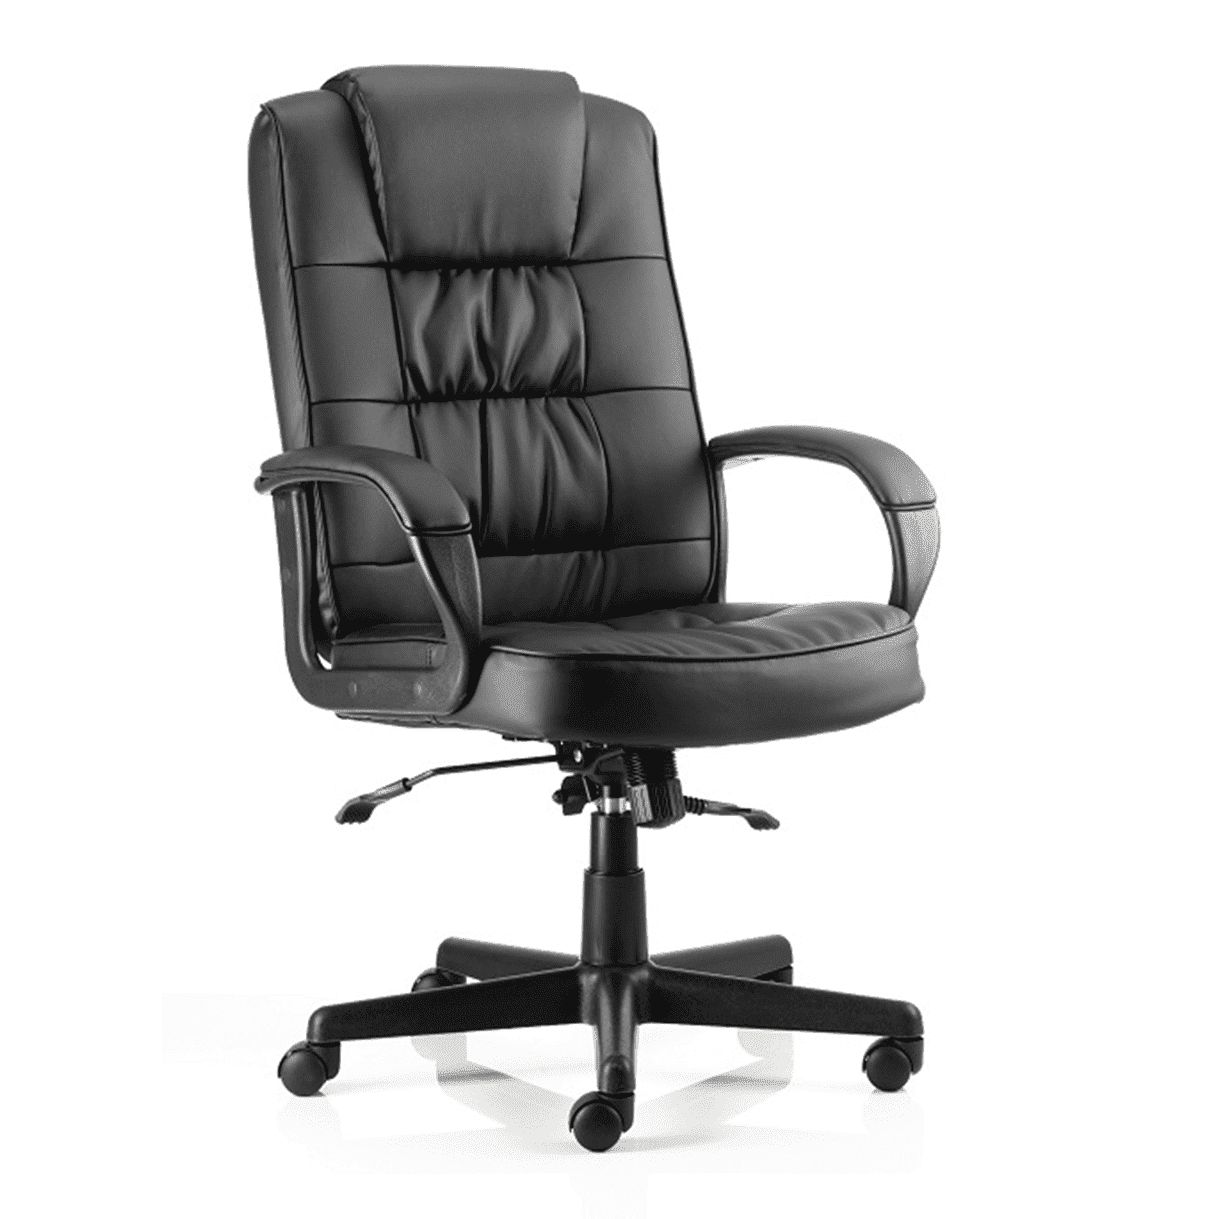 Moore Deluxe High Back Executive Office Chair - Black, Soft Bonded Leather, Chrome Frame, Fixed Arms, 125kg Capacity, 8hr Usage - Flat Packed